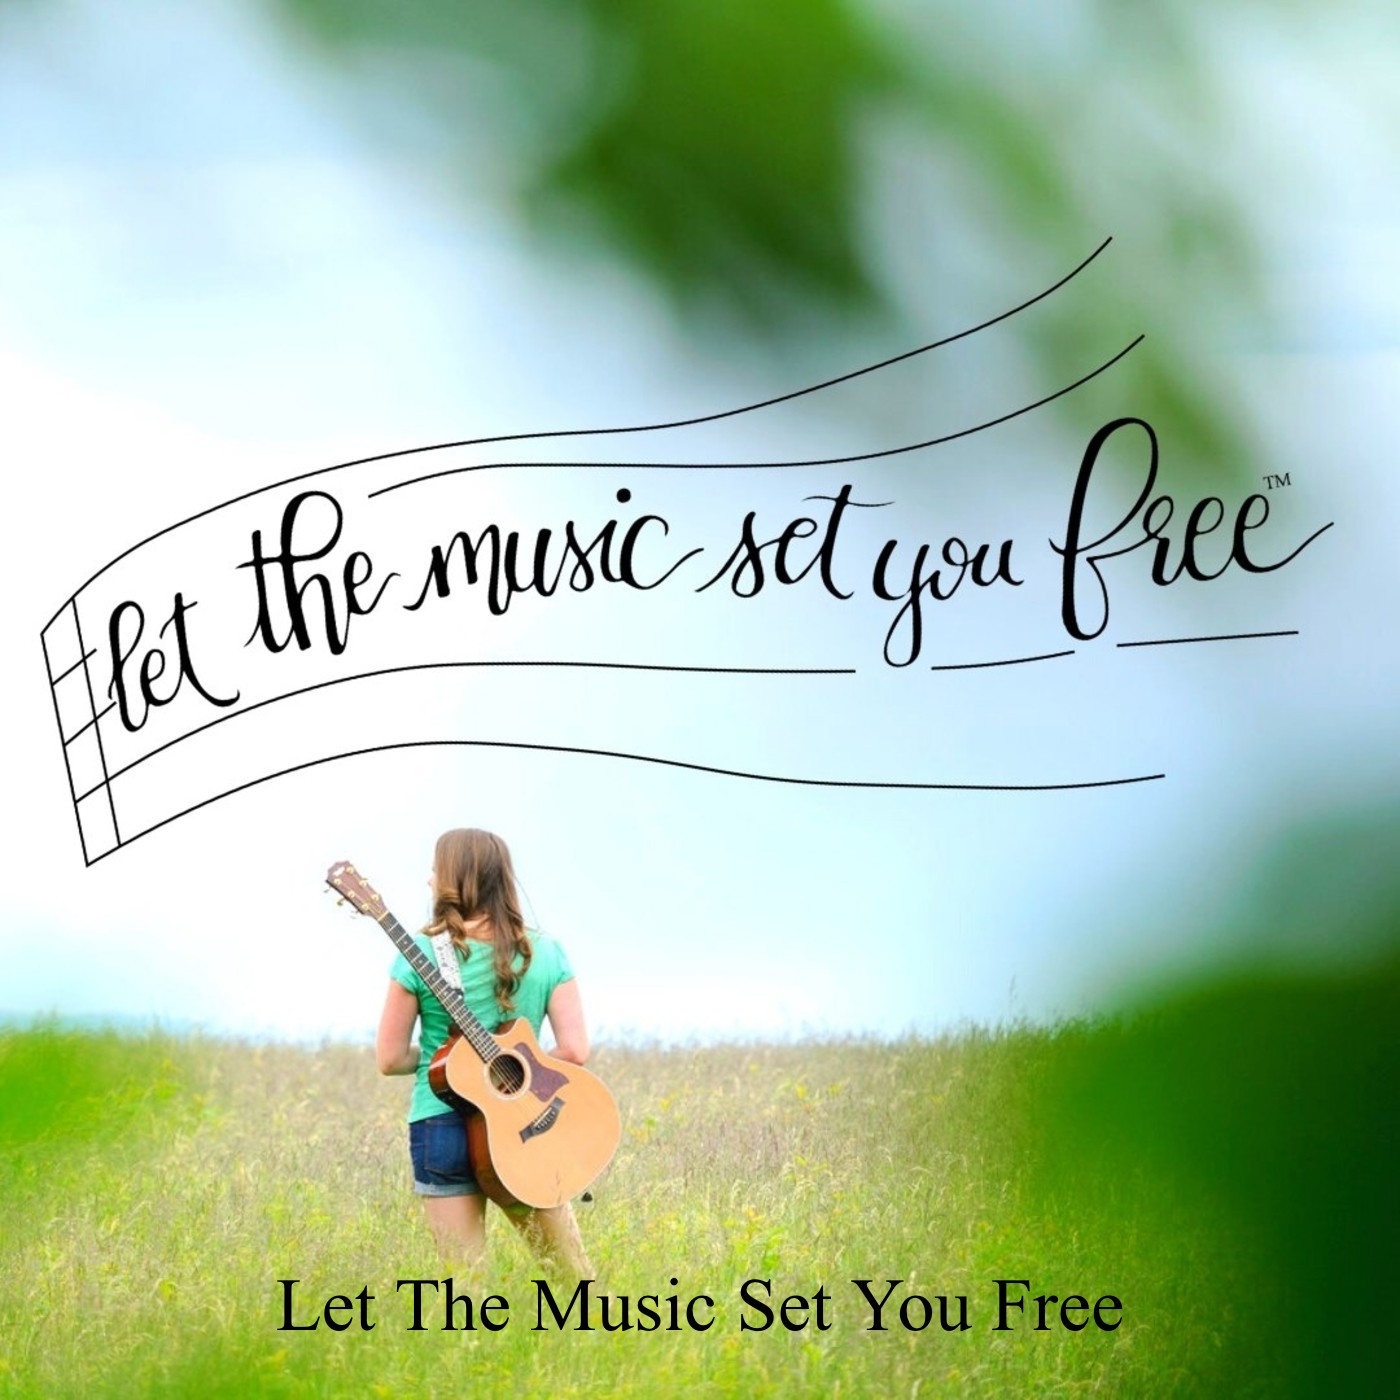 Let The Music Set You Free